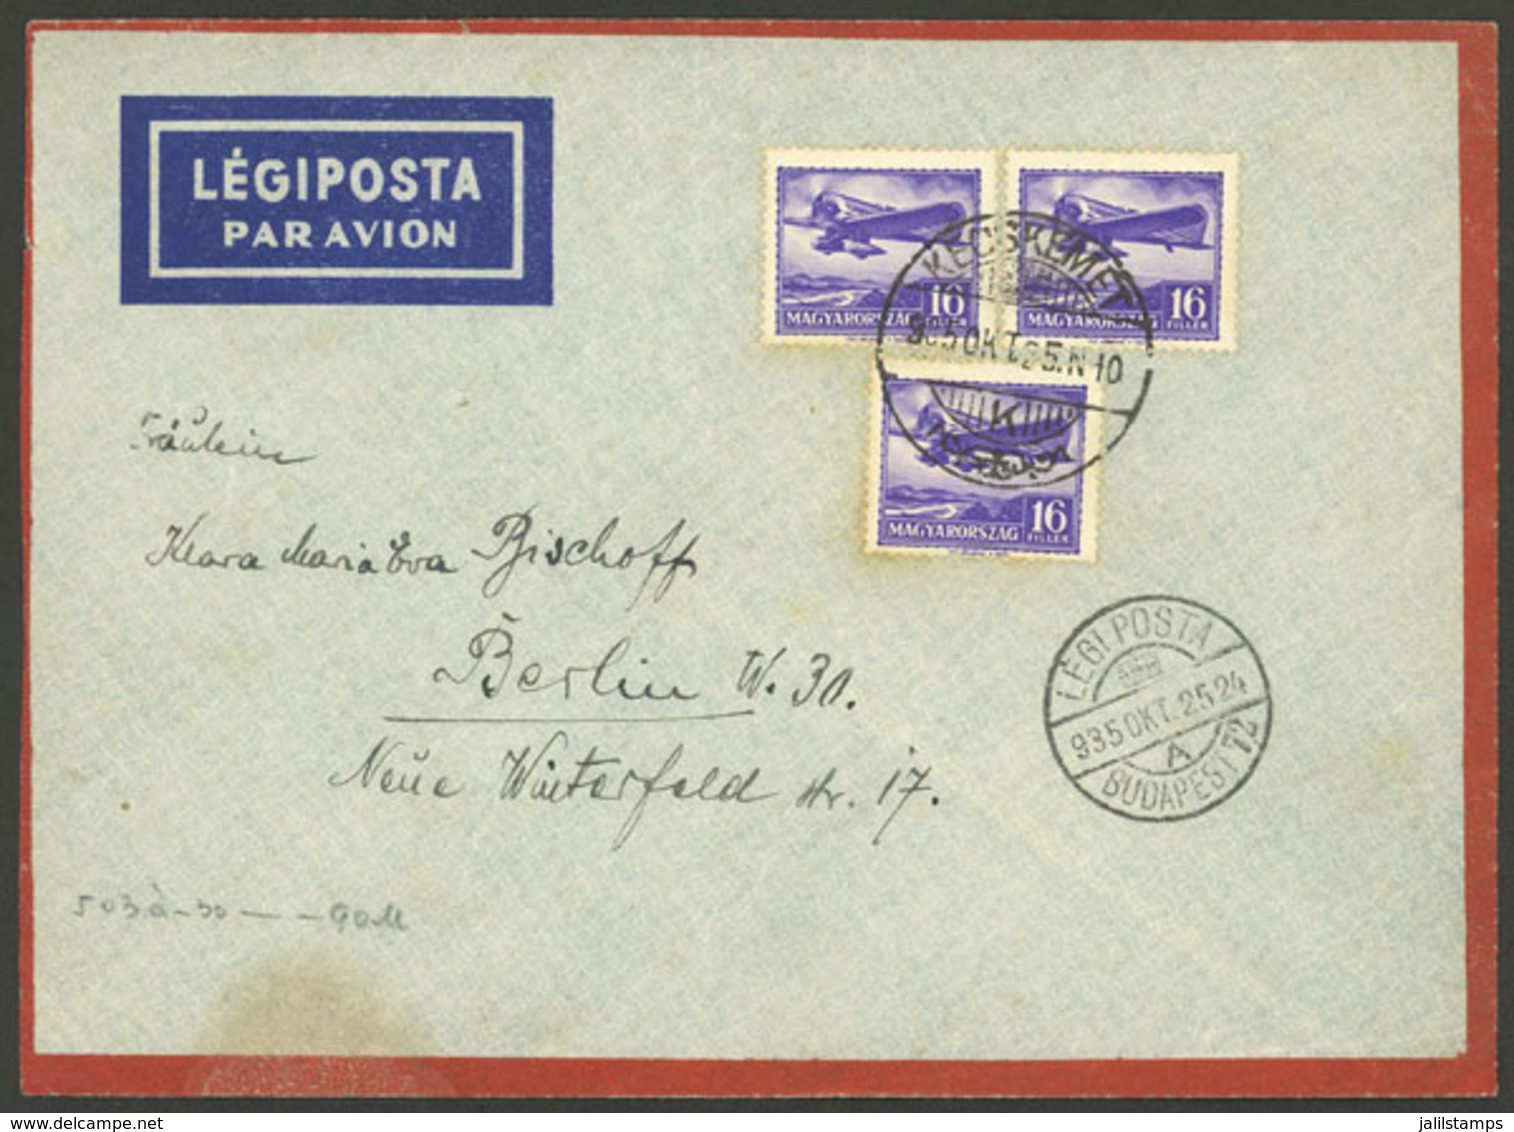 HUNGARY: 25/OC/1925 KECSKEMET - Berlin (Germany), Airmail Cover With Nice Franking And Budapest Transit Mark, Very Nice! - Briefe U. Dokumente